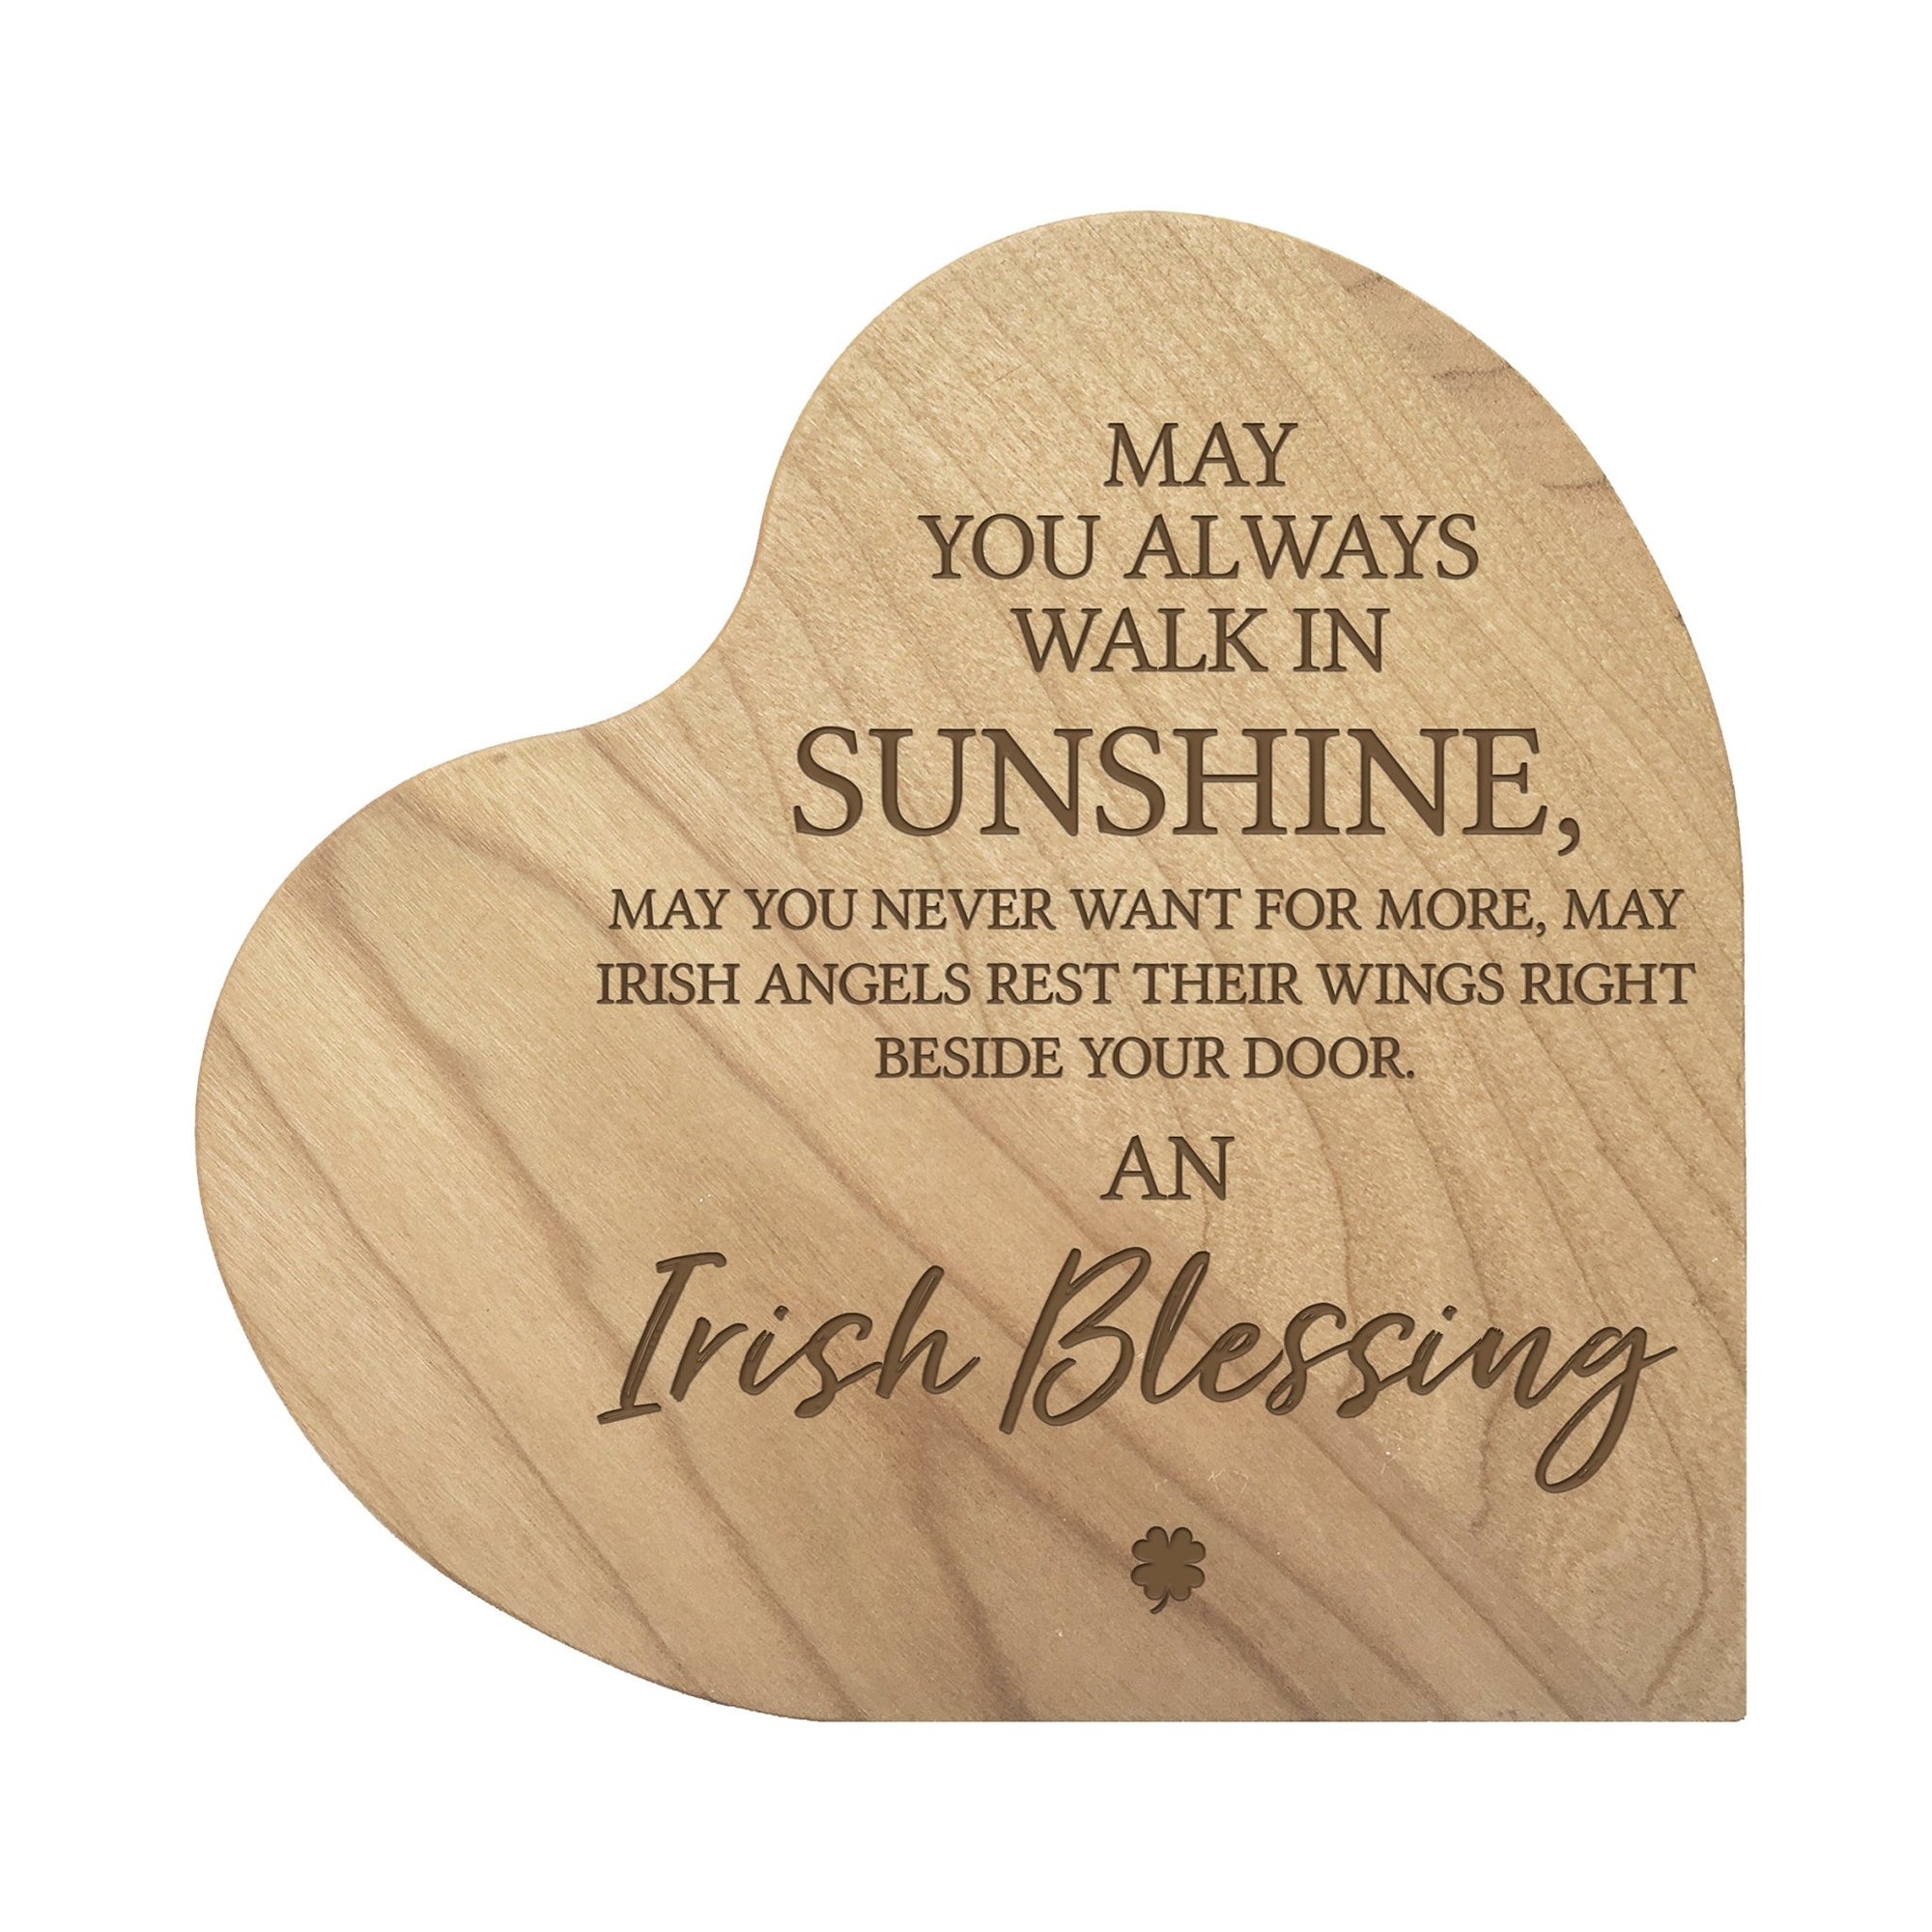 Engraved Wooden Inspirational Heart Block 5” x 5.25” x 0.75” - May You Always Walk - LifeSong Milestones